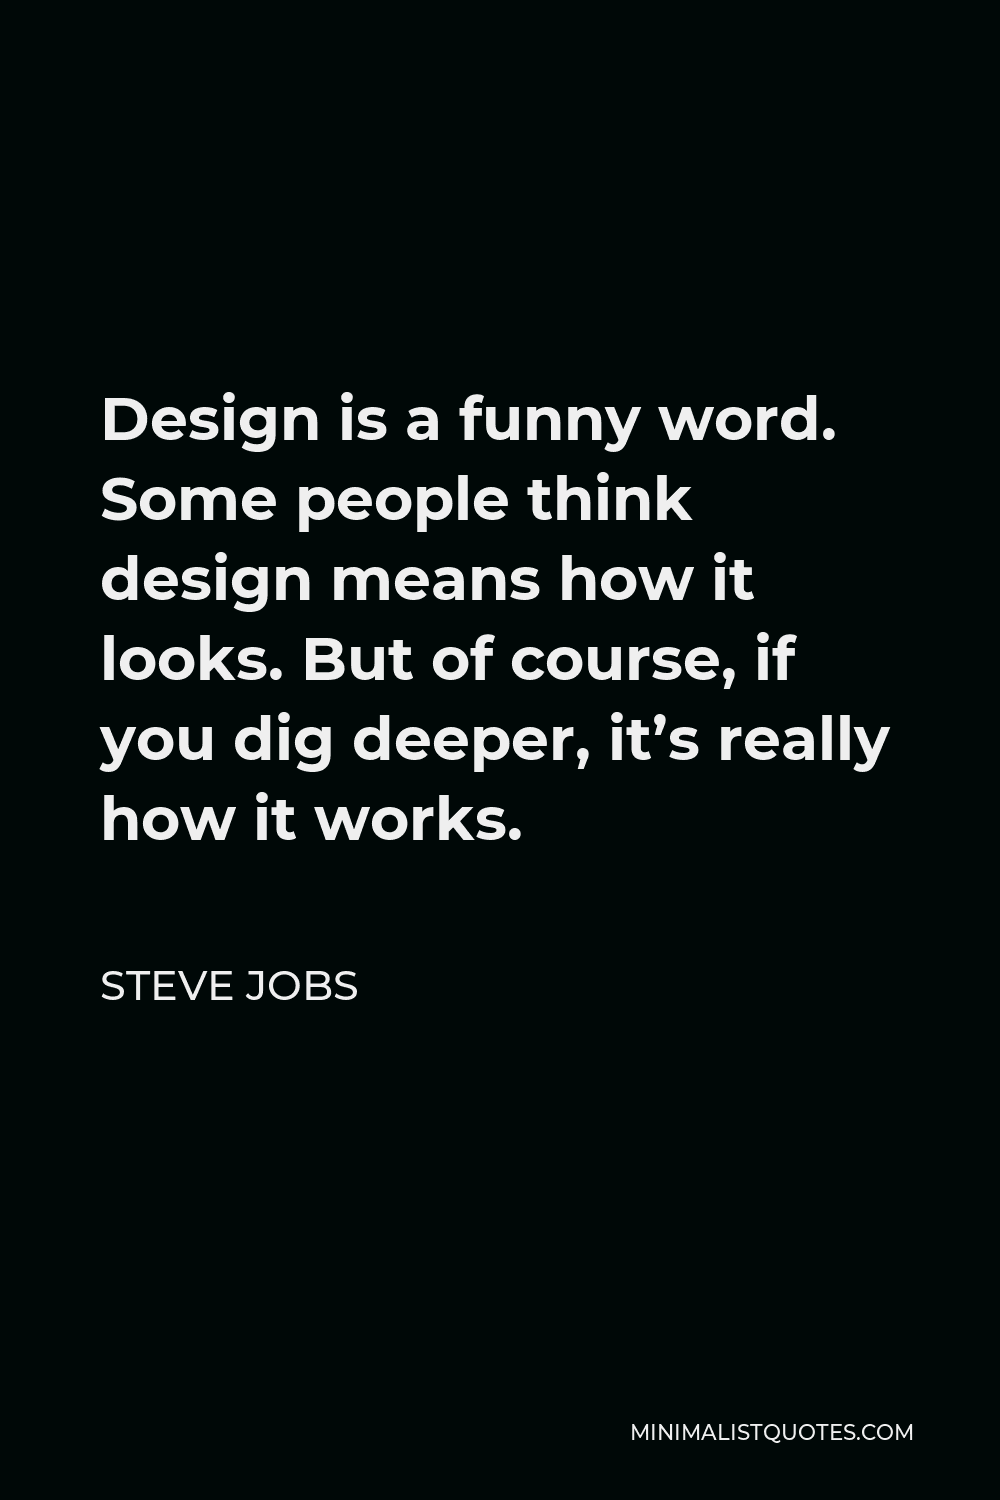 Steve Jobs Quote - Design is a funny word. Some people think design means how it looks. But of course, if you dig deeper, it’s really how it works.